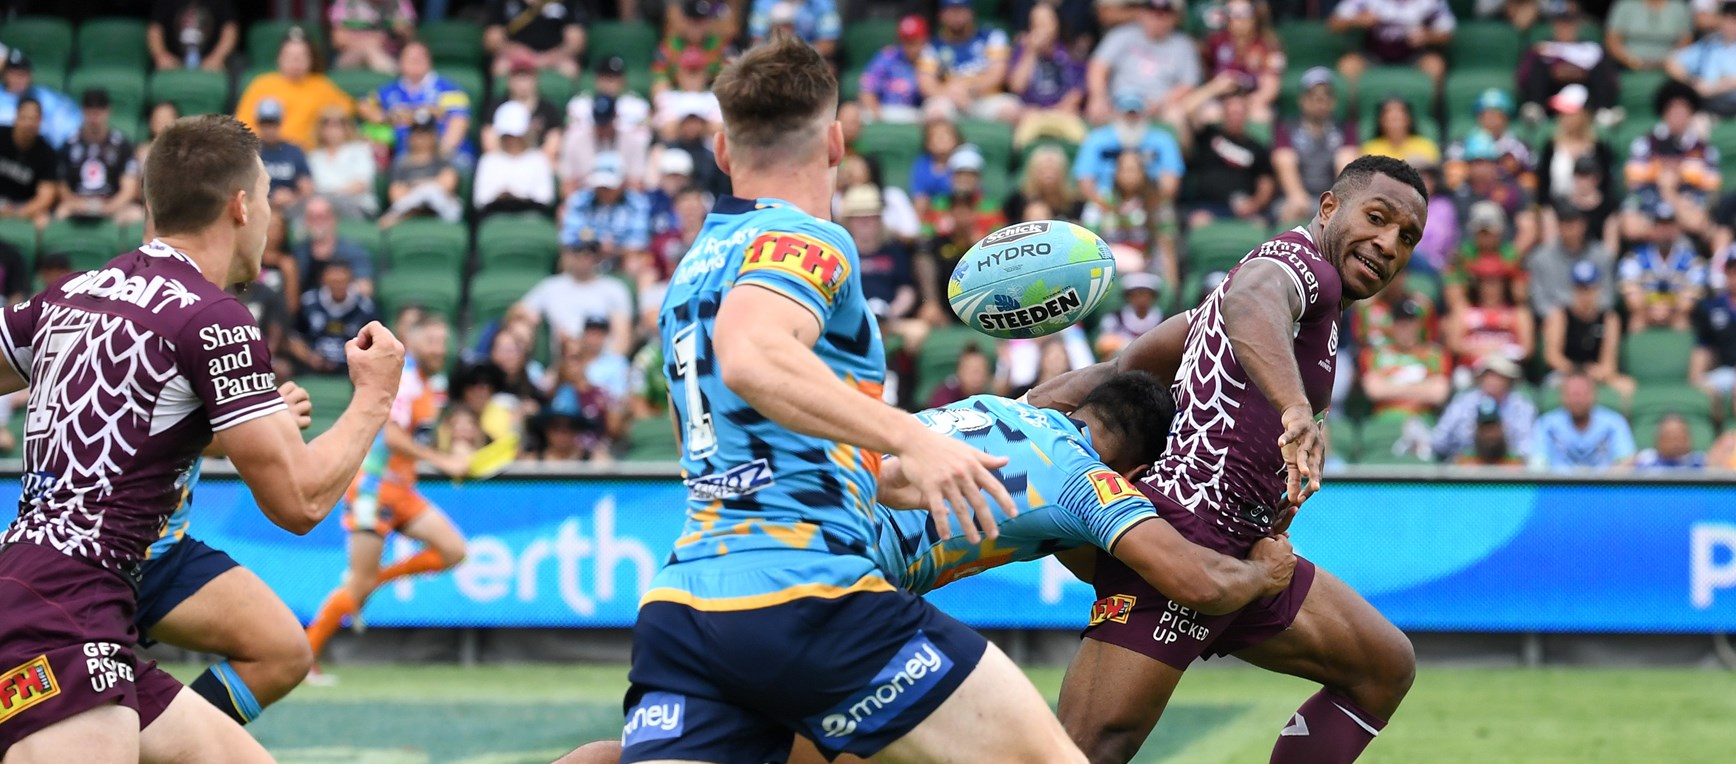 Best Sea Eagles snaps from Nines tournament